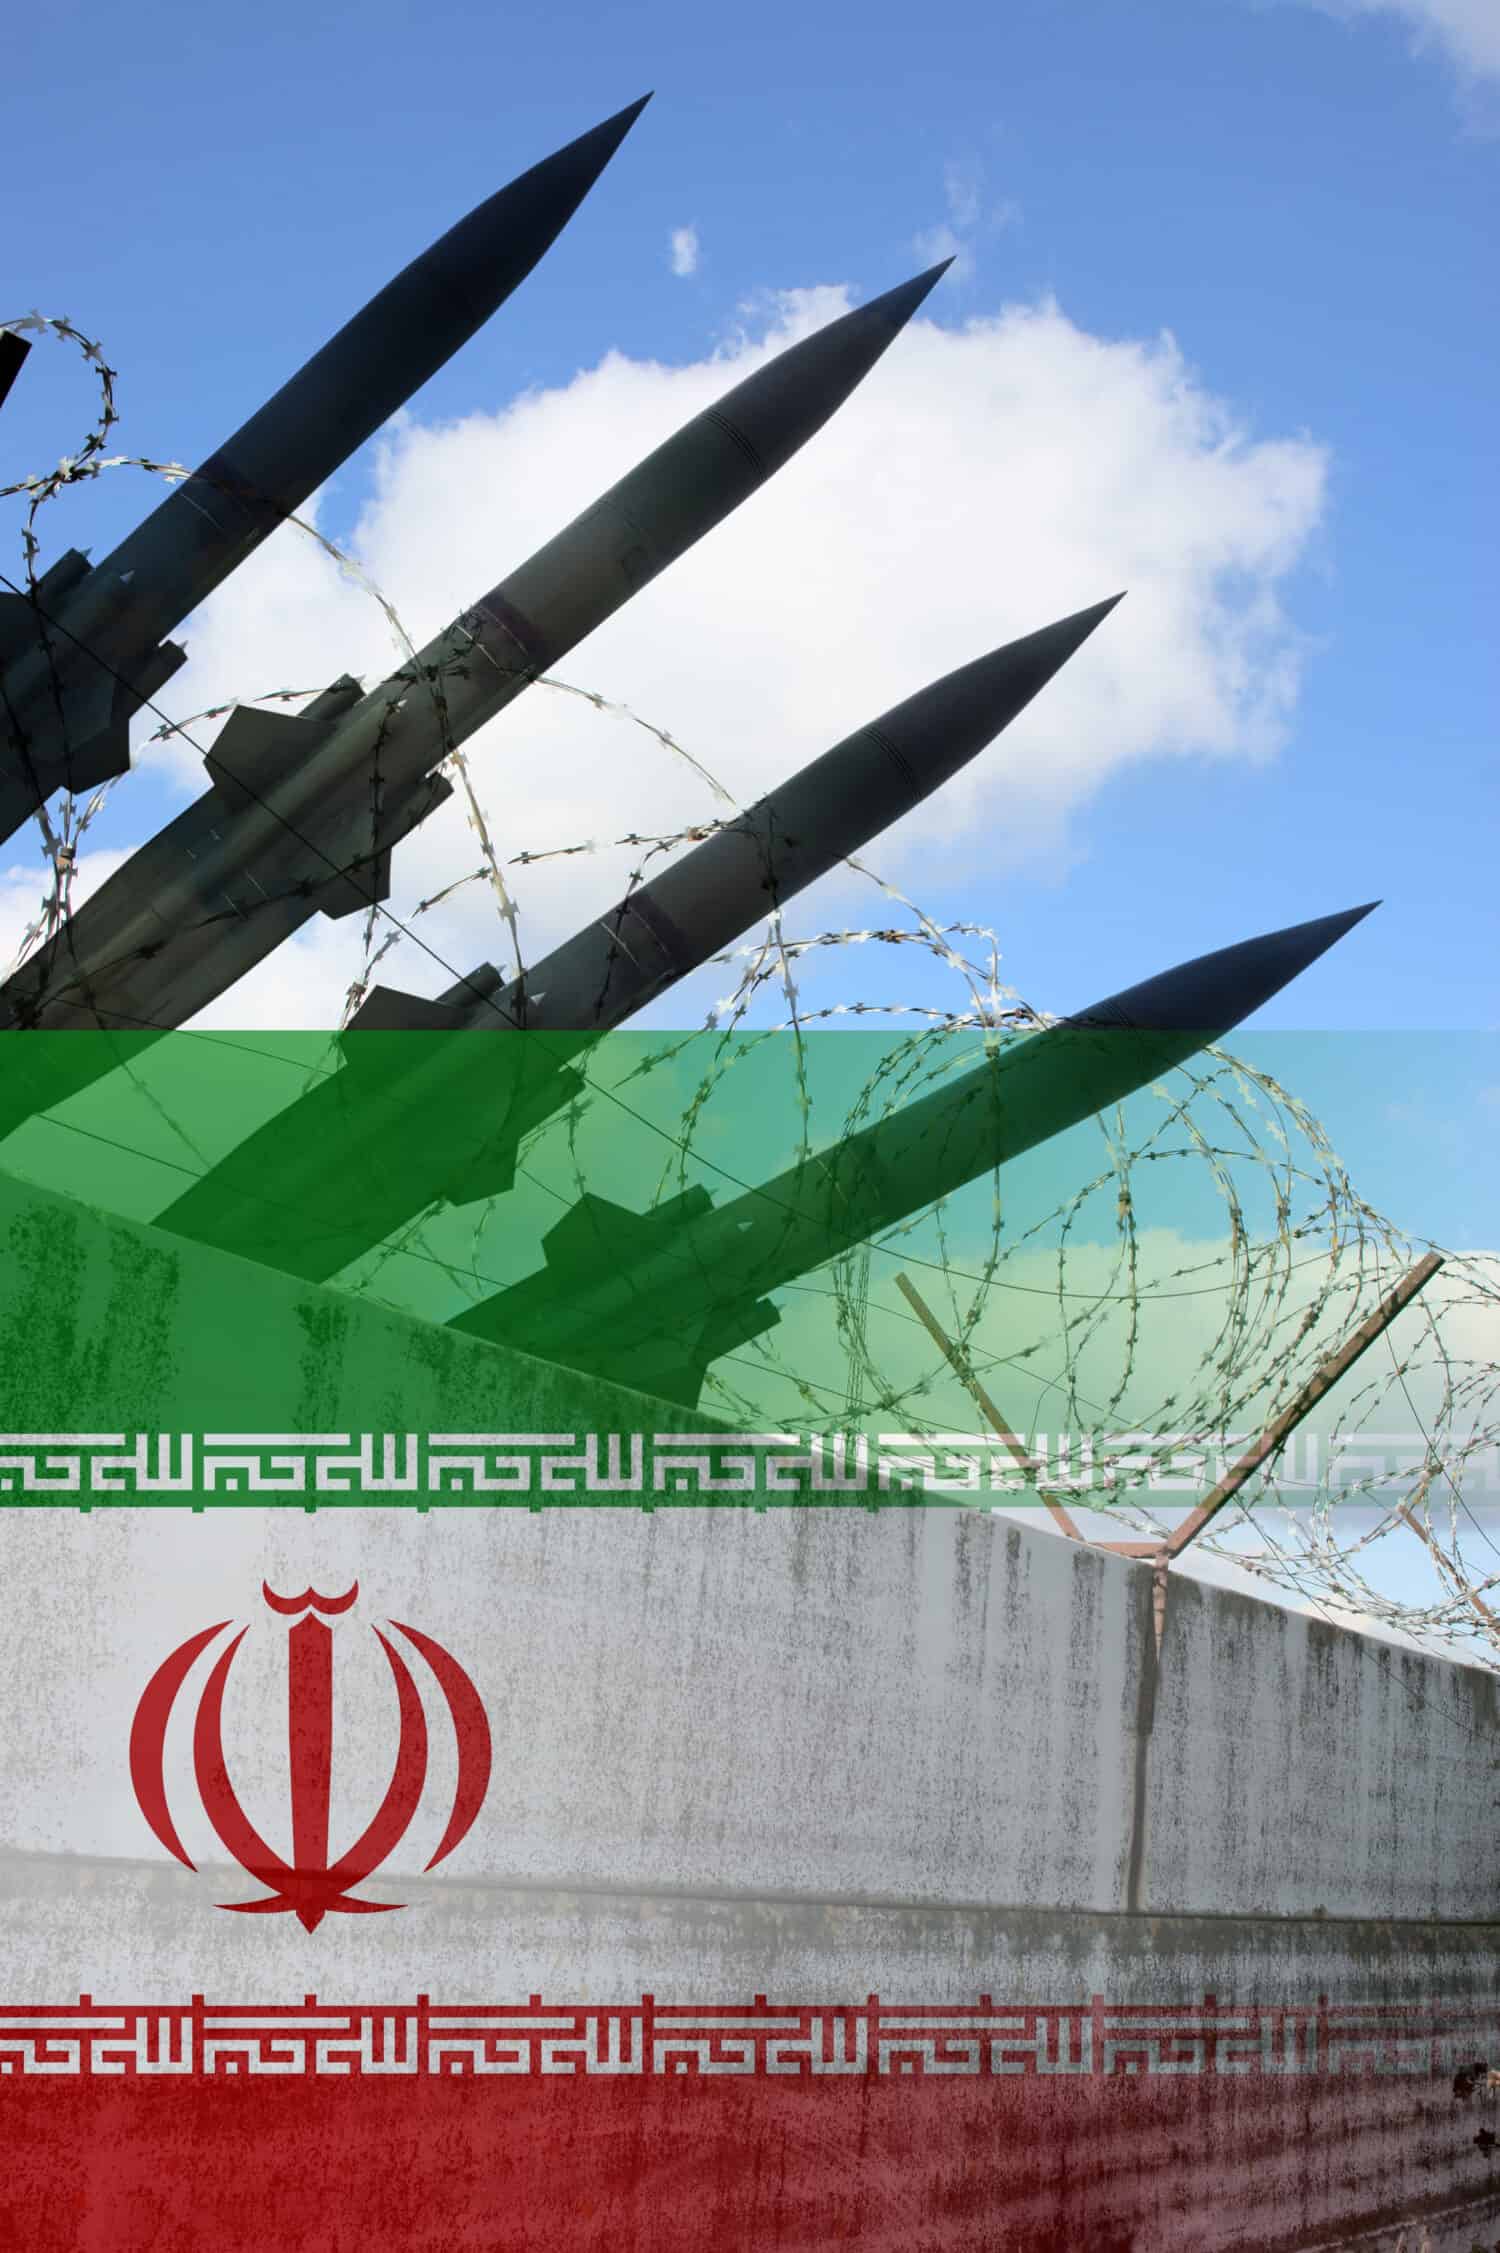 Military rockets, wall with barbwire and Iran national flag by Valery Evlakhov